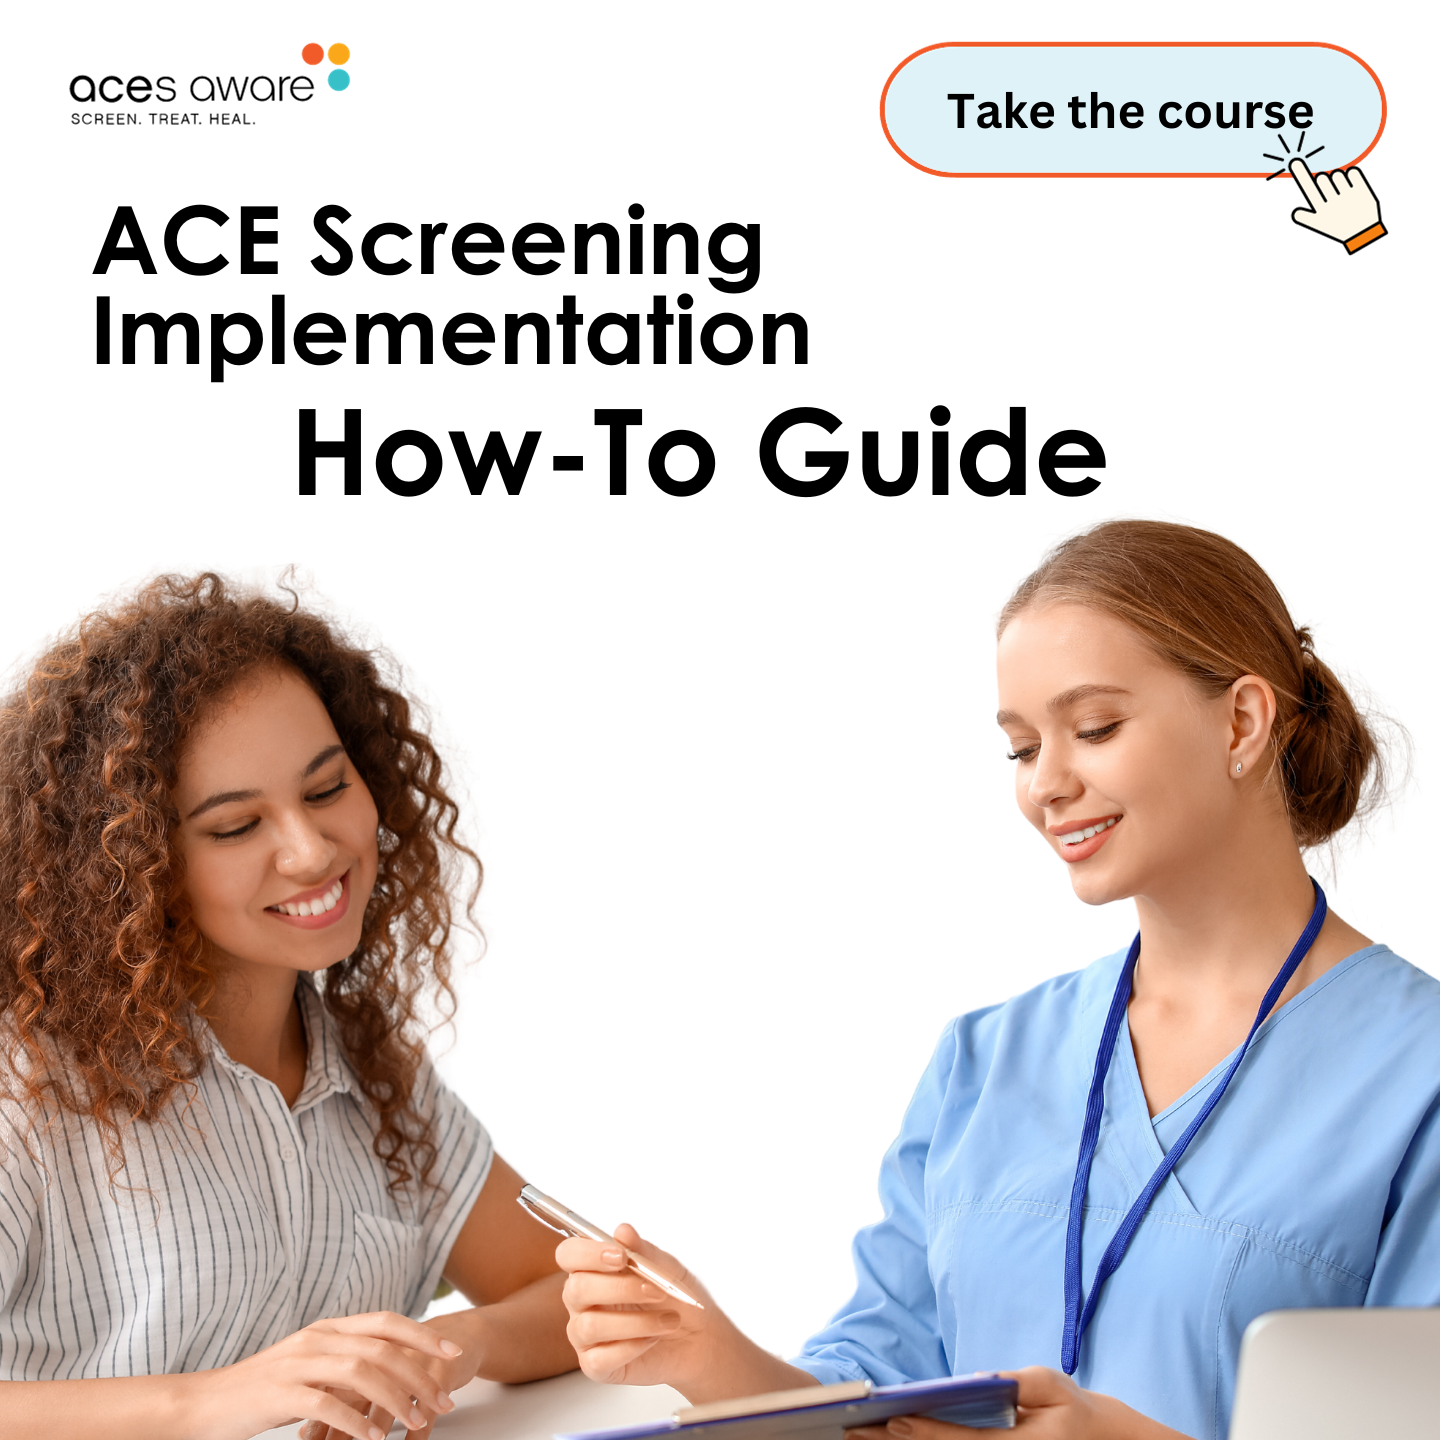 Image for ACE Screening Implementation How-To Guide Course is LIVE